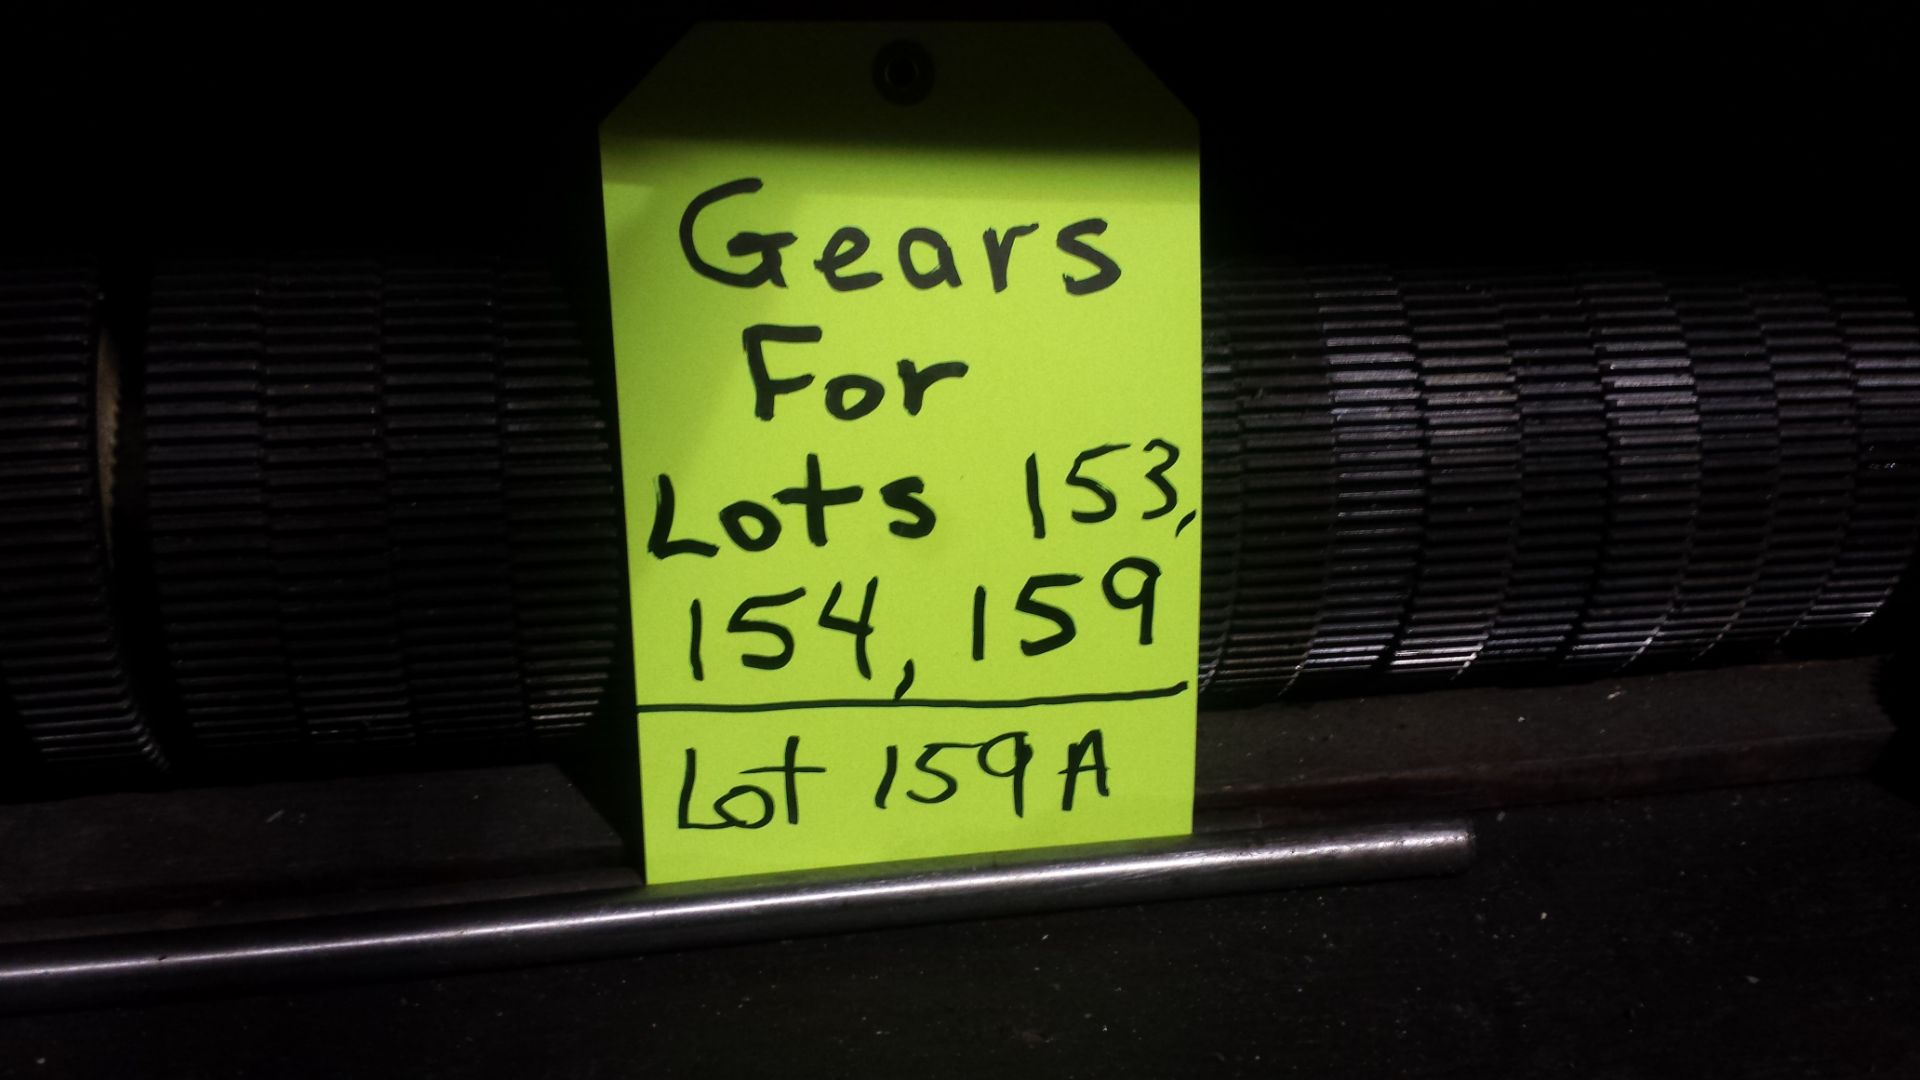 Gears for lots 153, 154 & 159